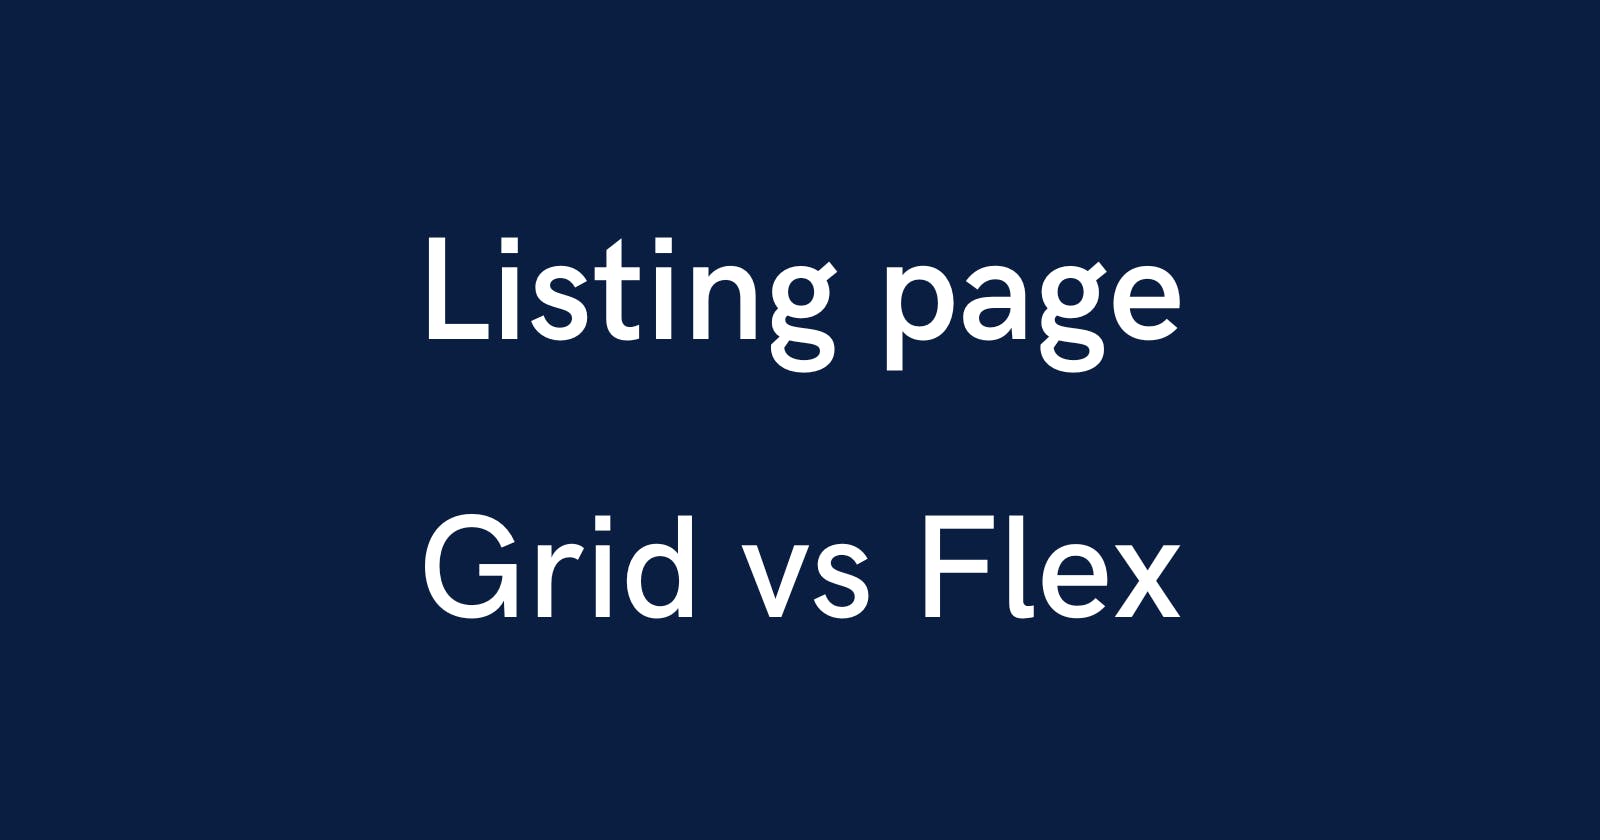 How to choose between grid and flex for a listing page